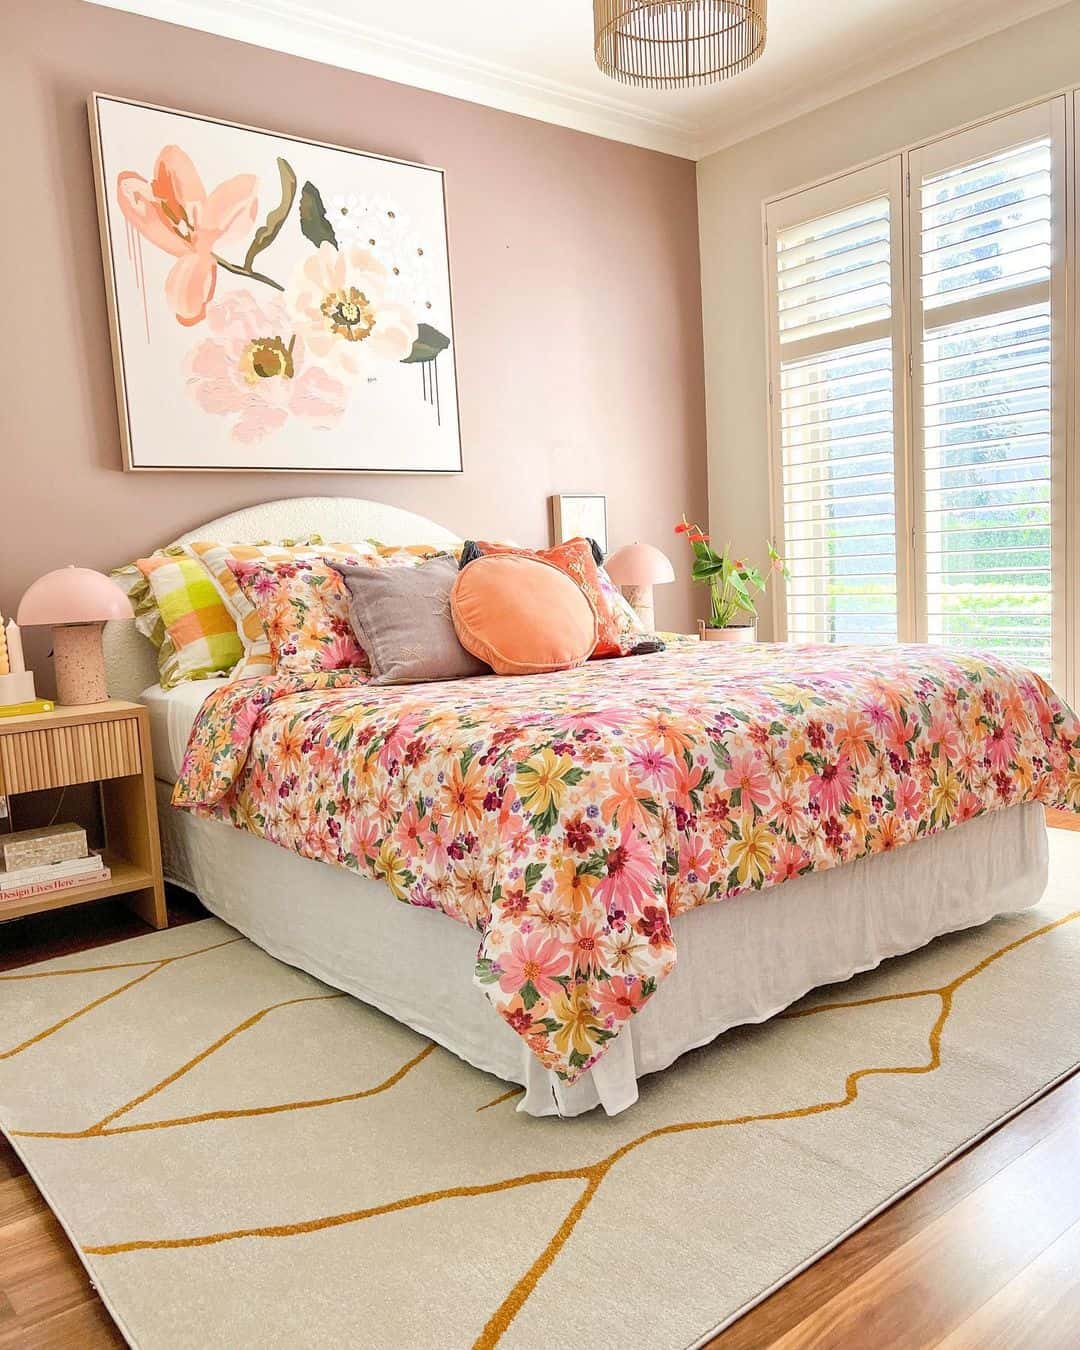 Teenage Dream: Modern Florals for a Chic Bedroom